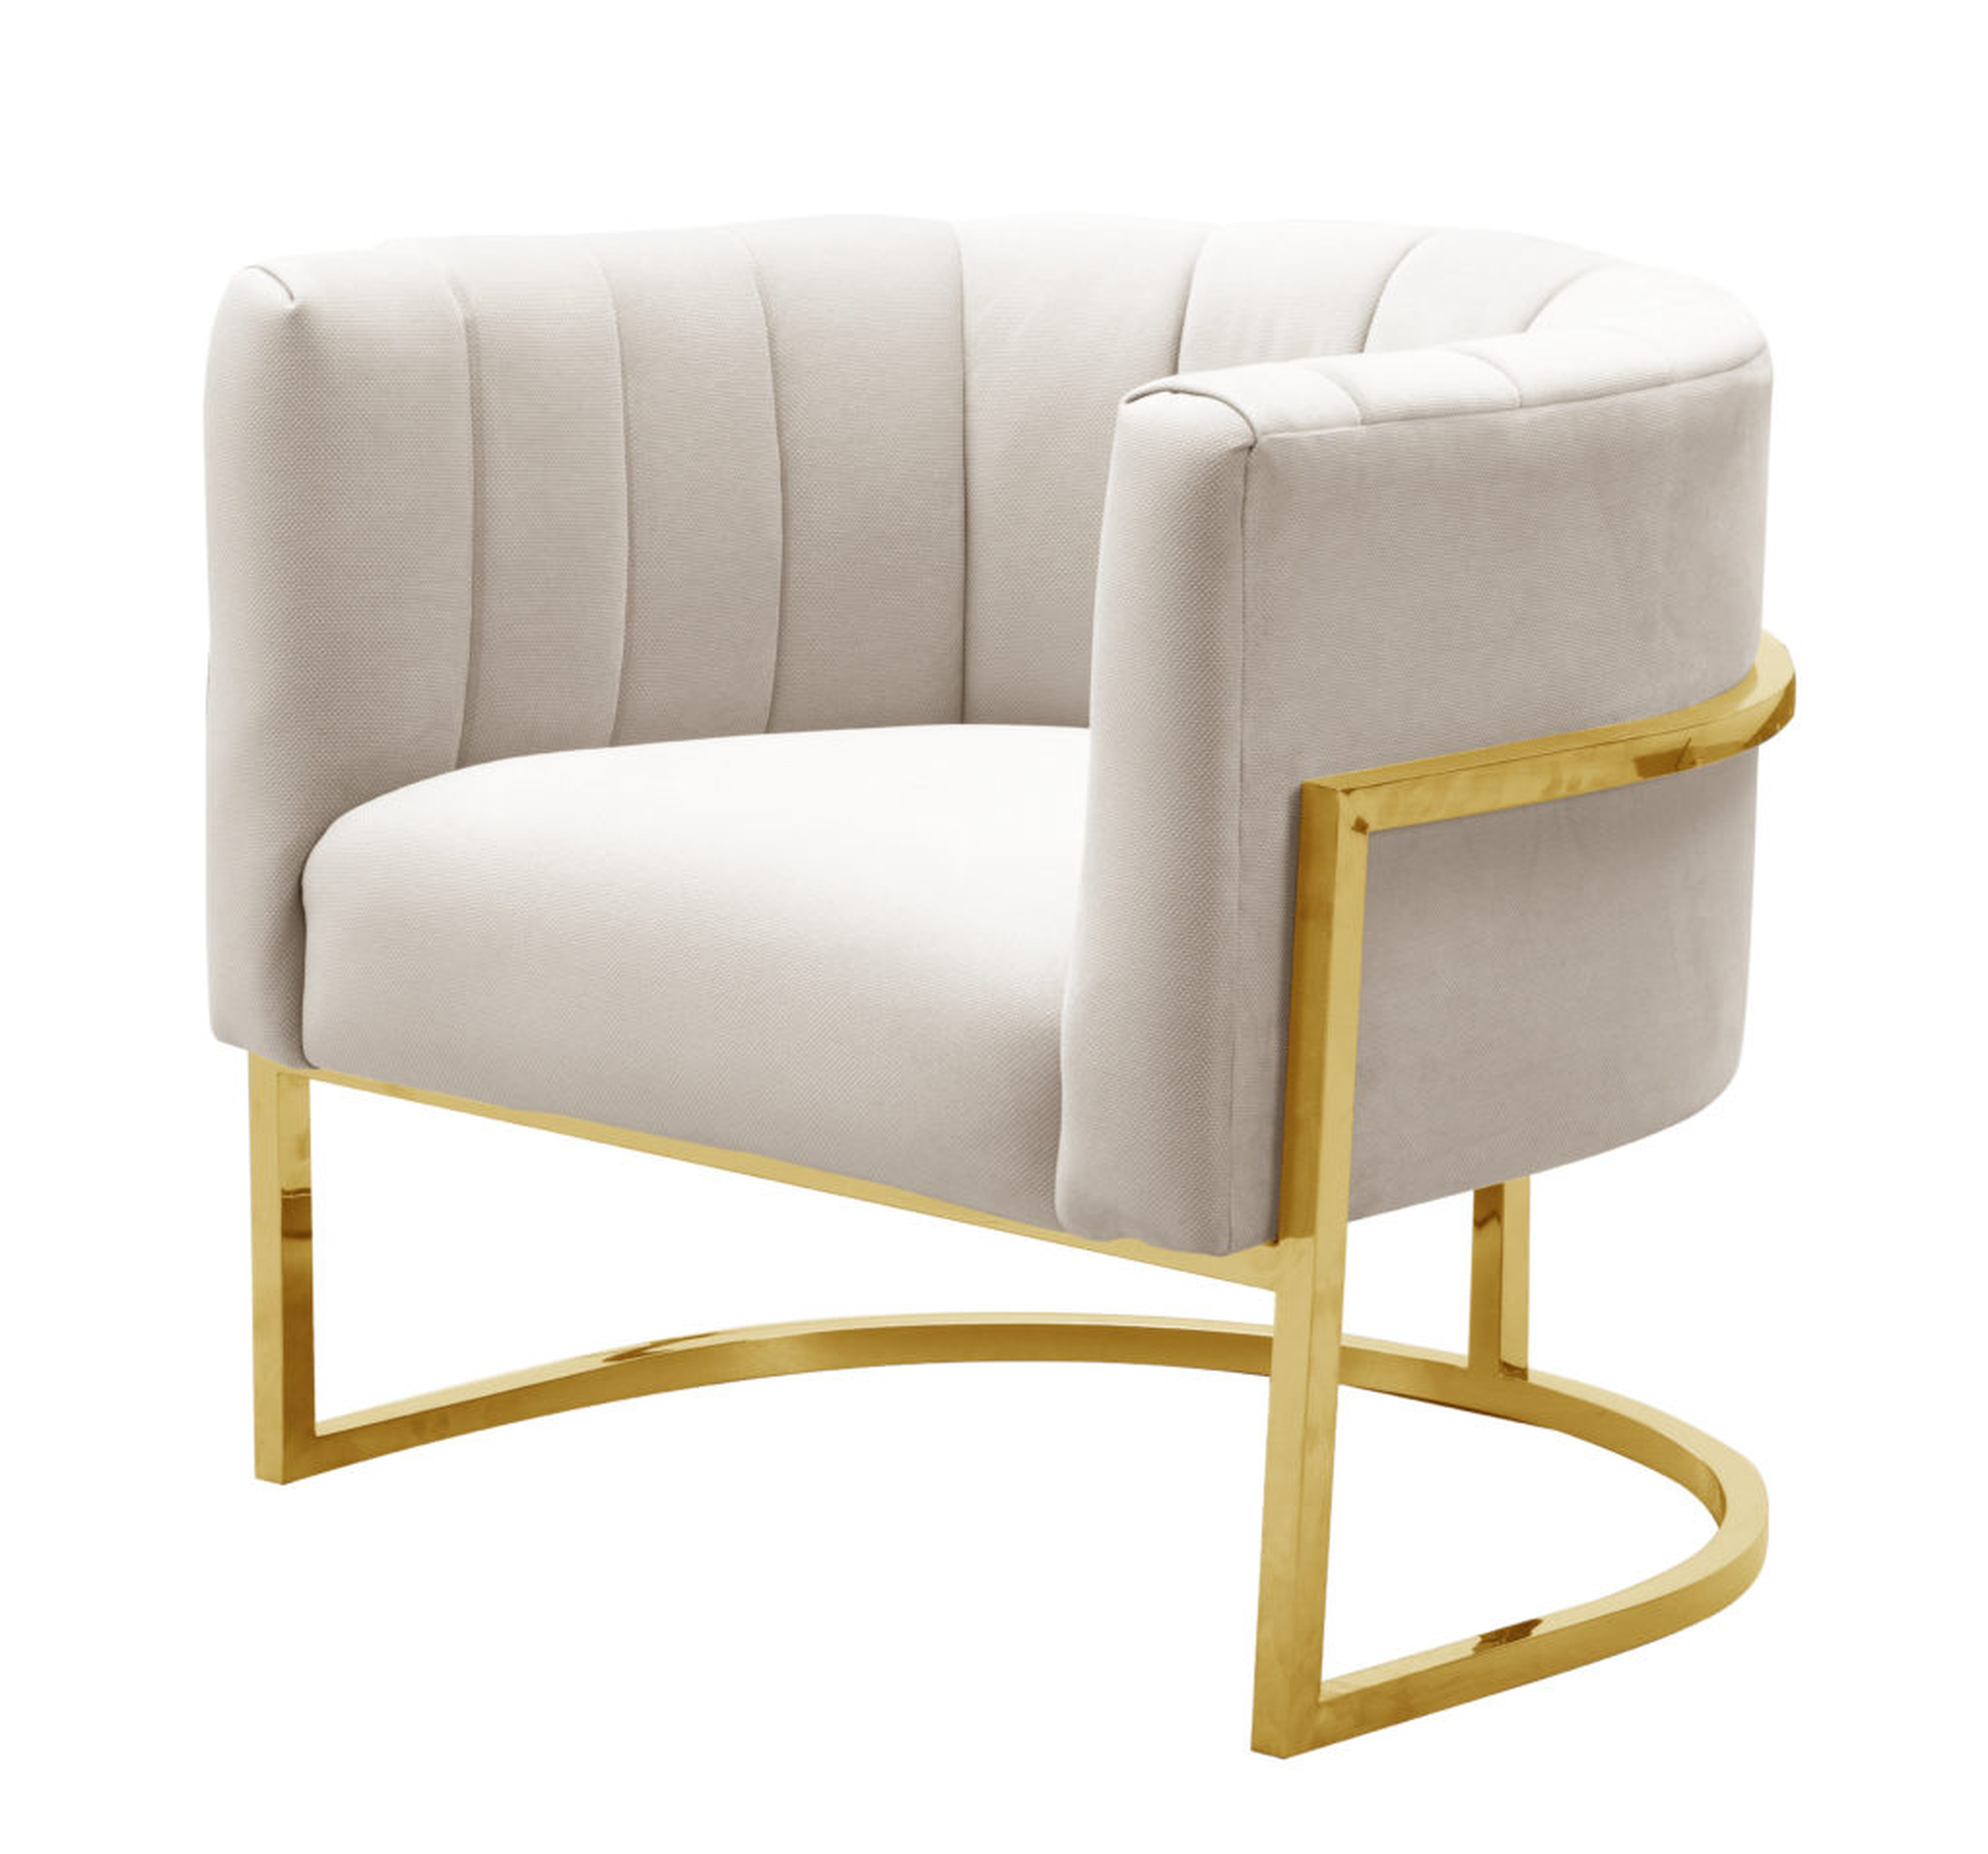 Adaline Spotted Cream Chair with Lilly Base - Maren Home